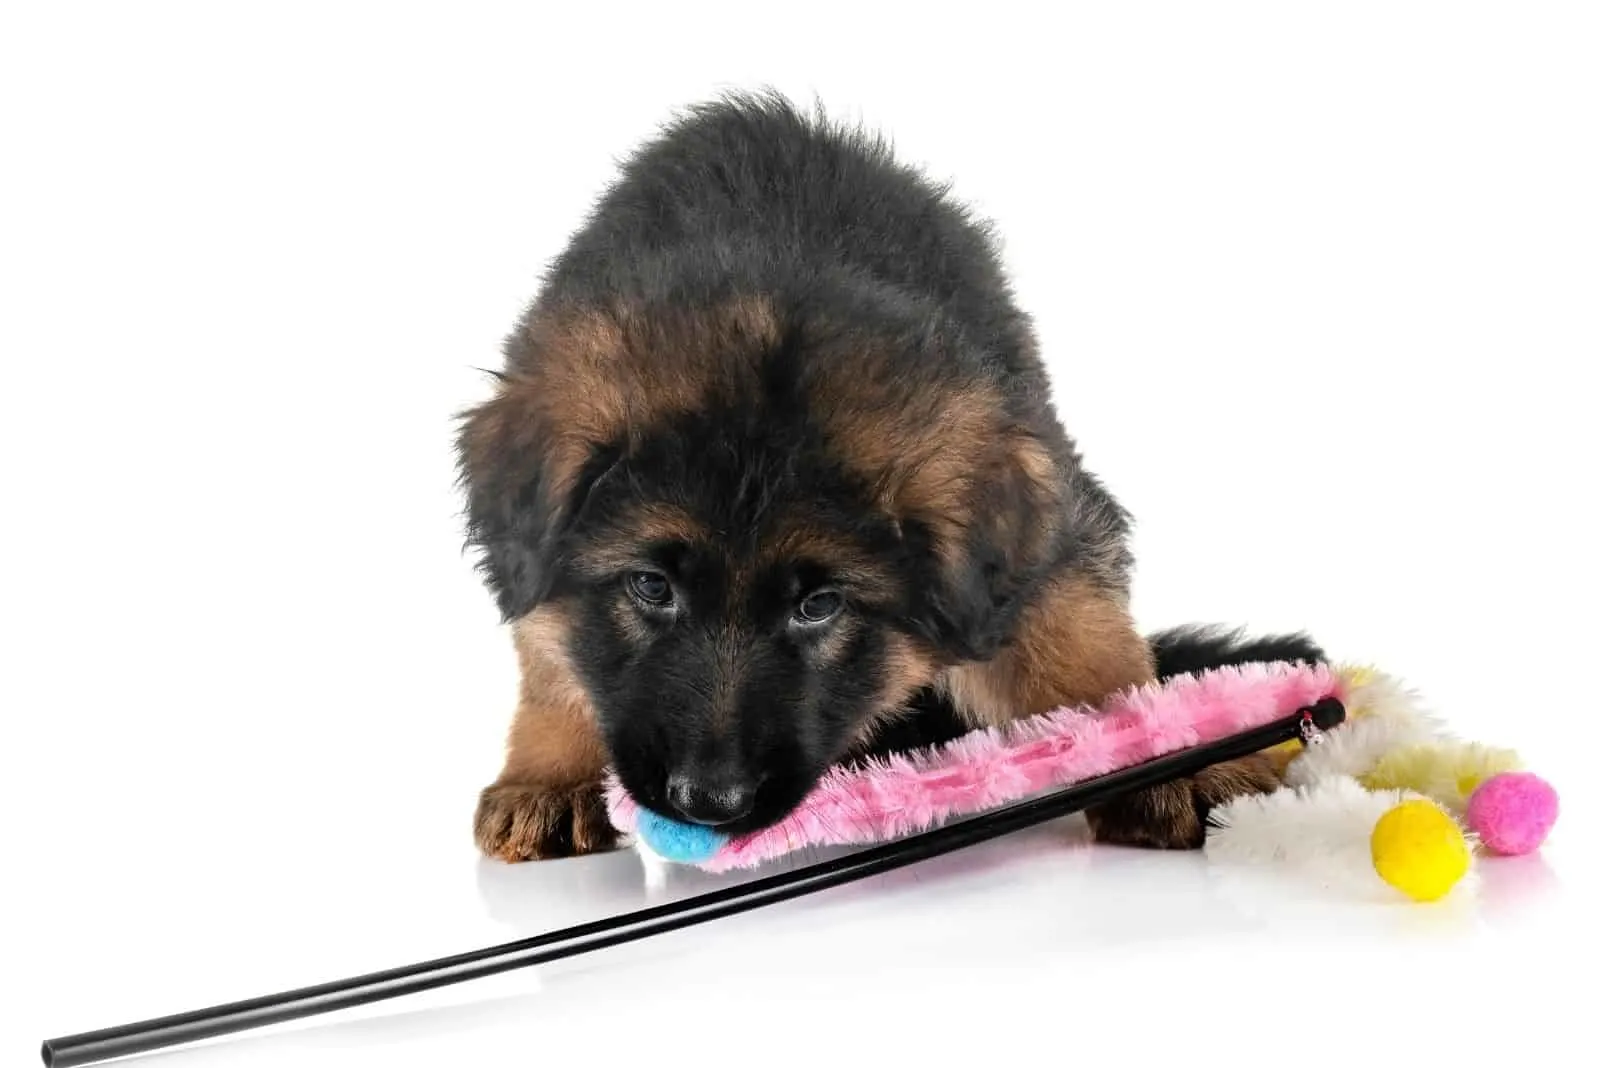 puppy german shepherd dog biting on a toy in white background